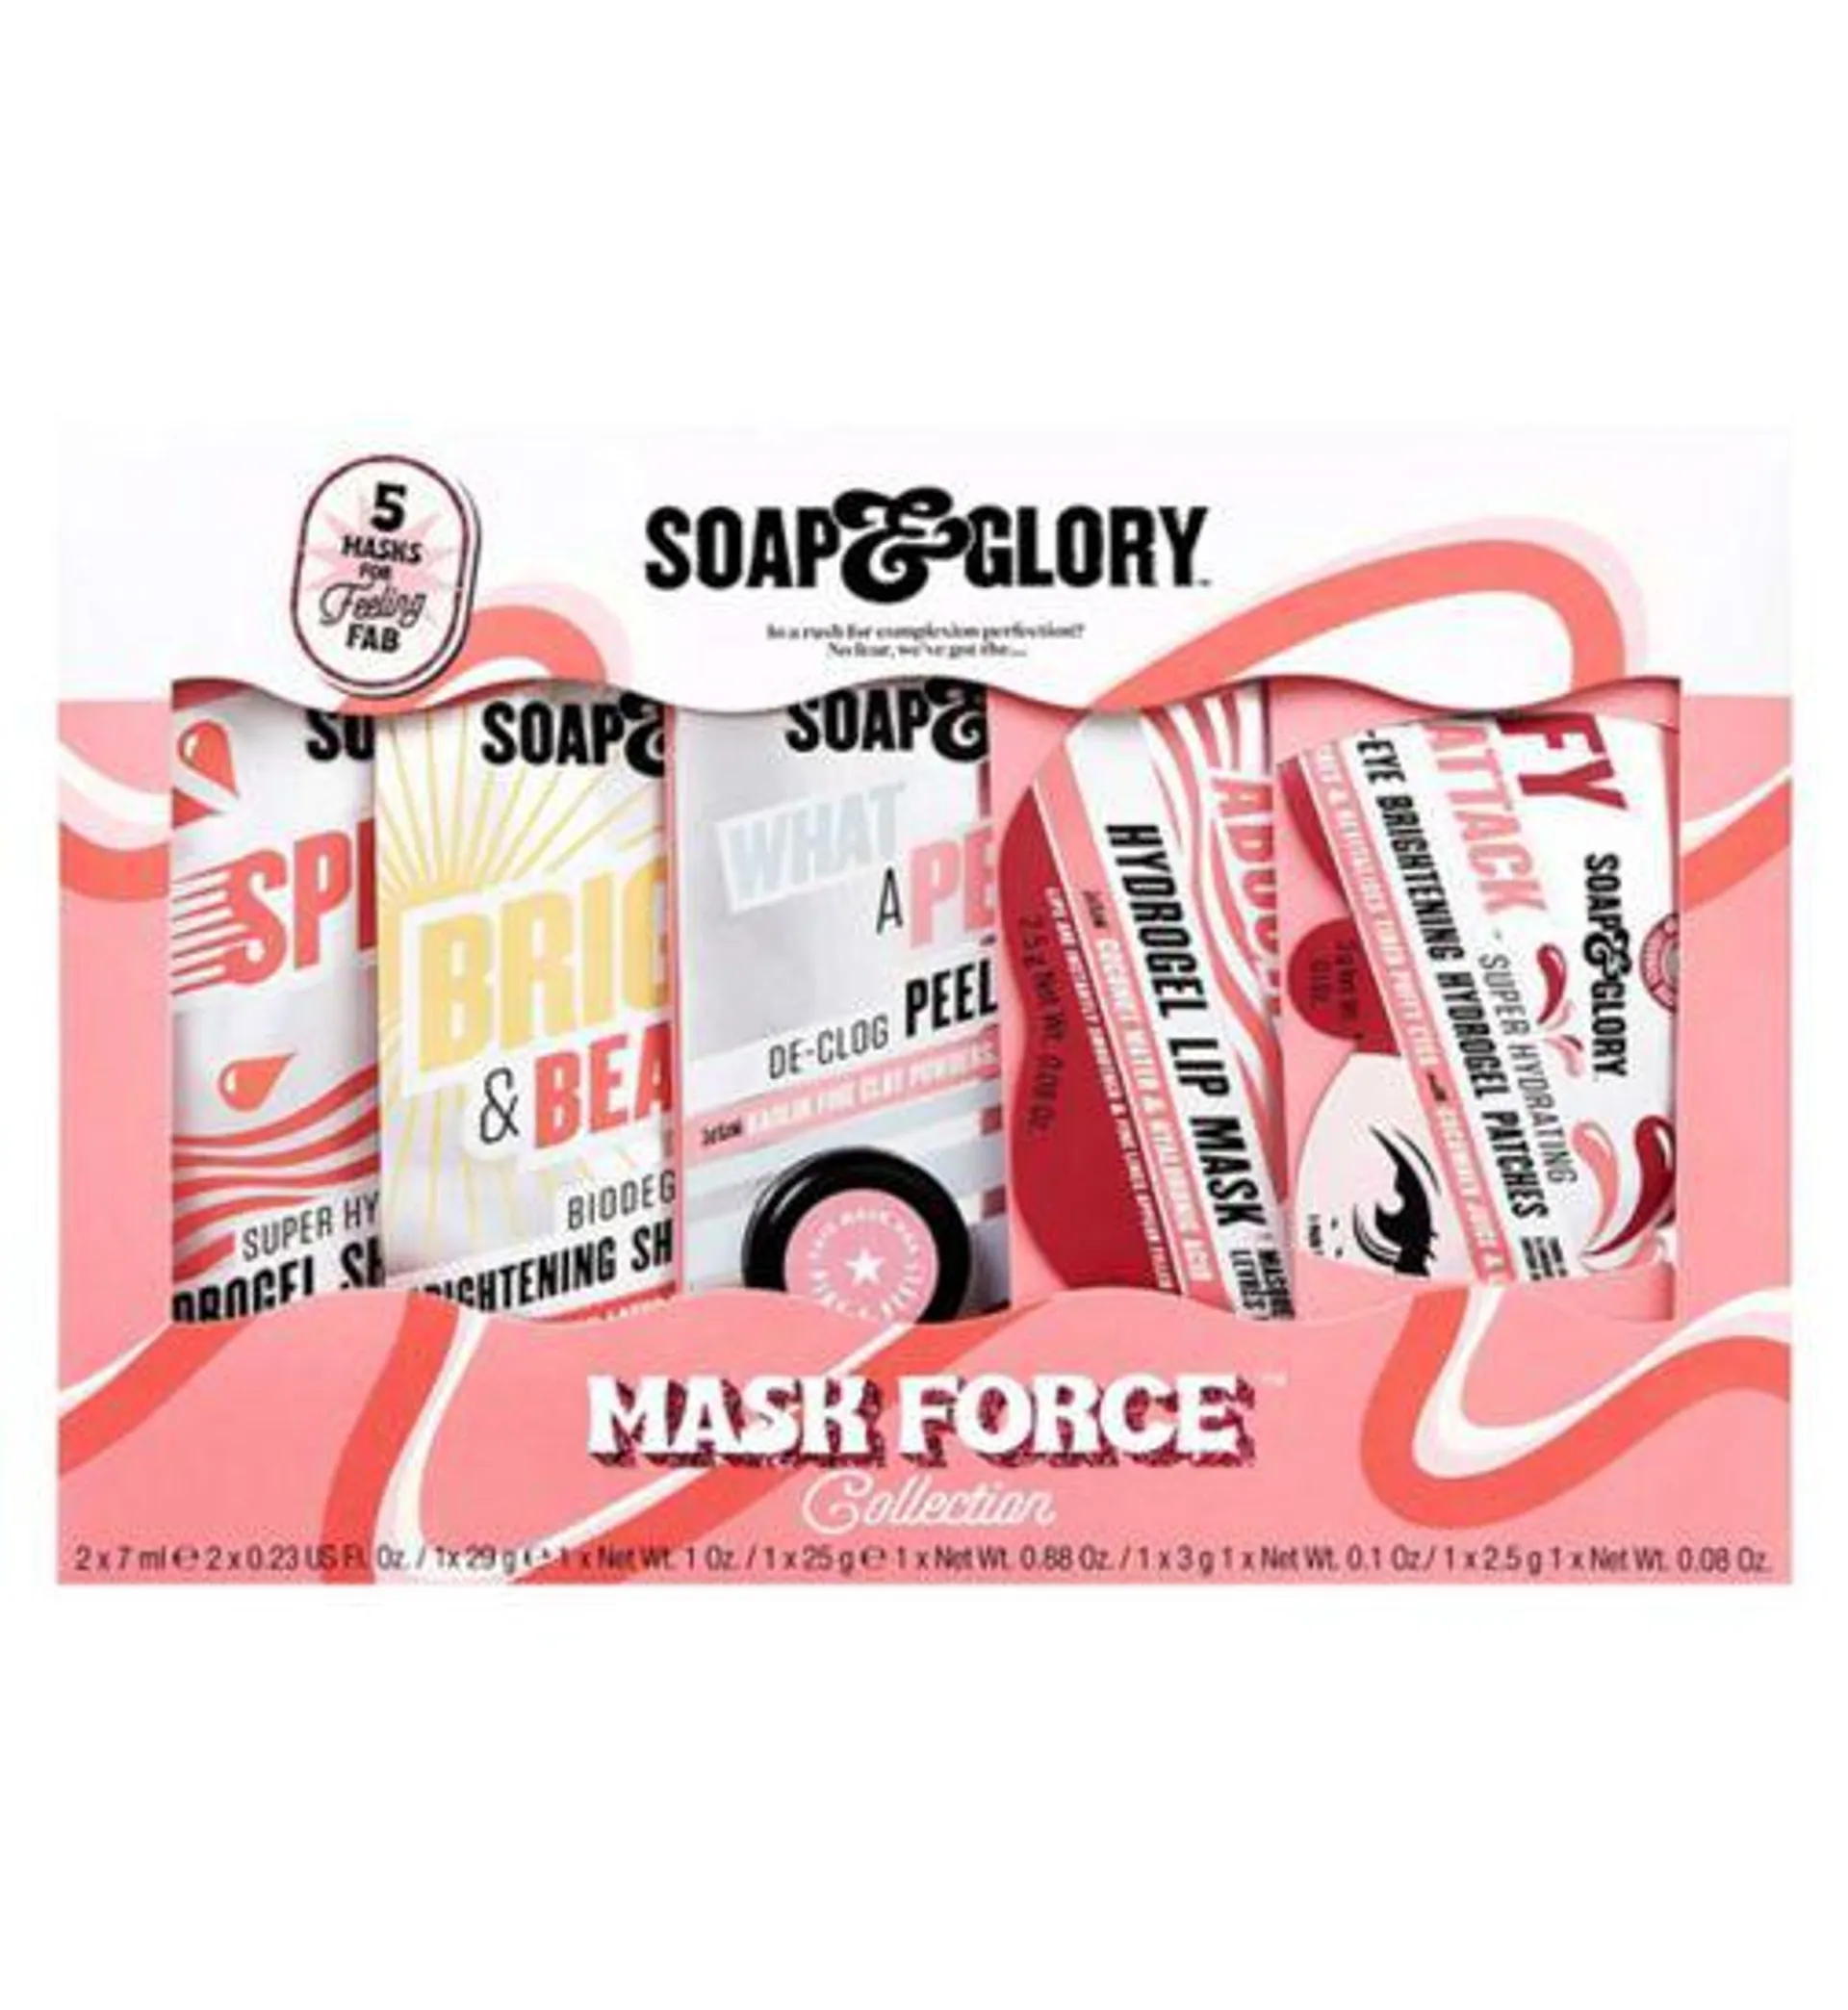 Soap & Glory Mask Force Collection 5 Piece Gift Set